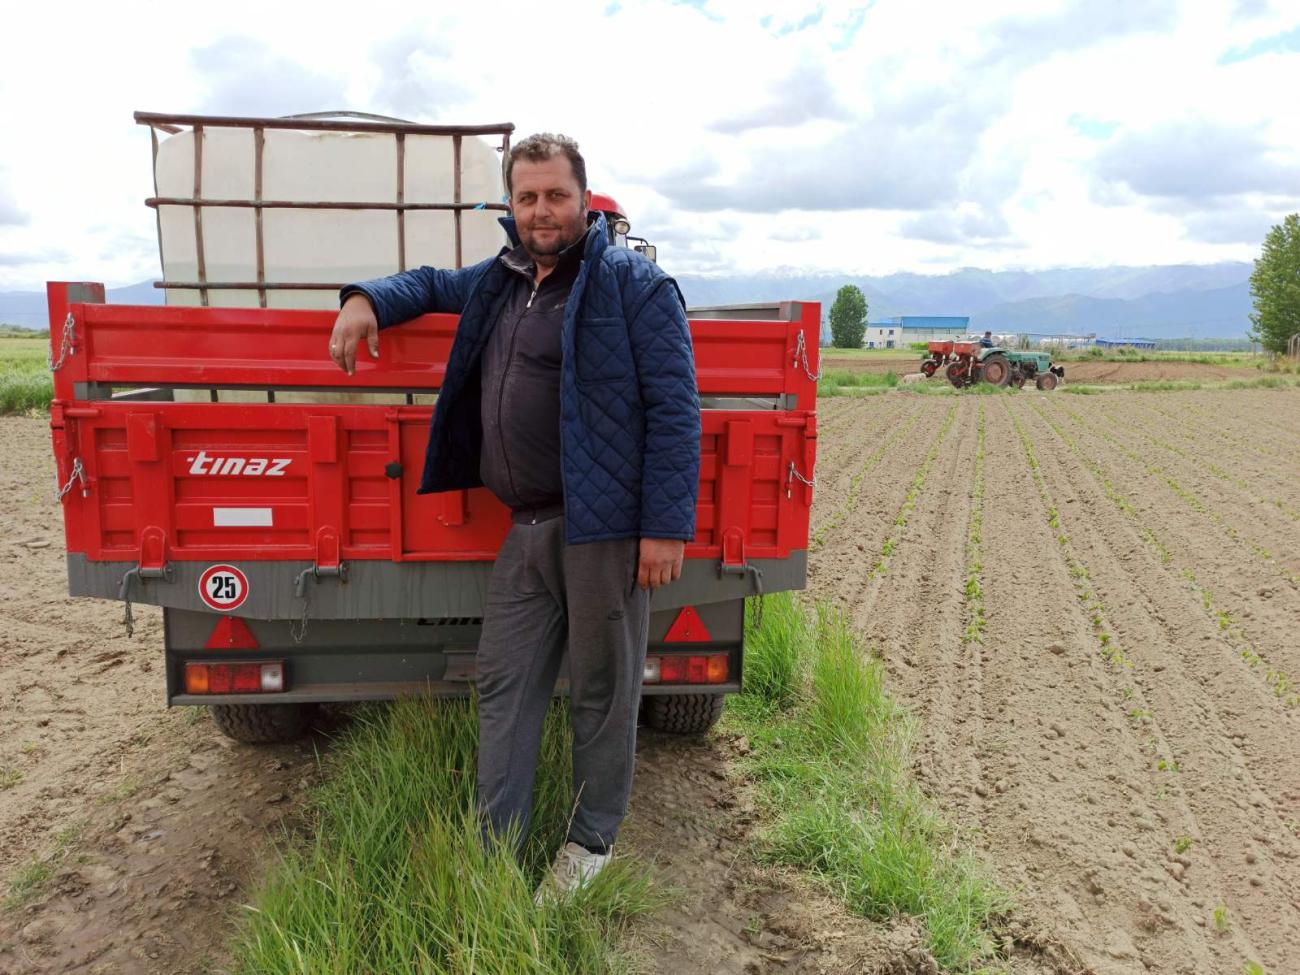 A farmer standing in front of a vehicle on a field